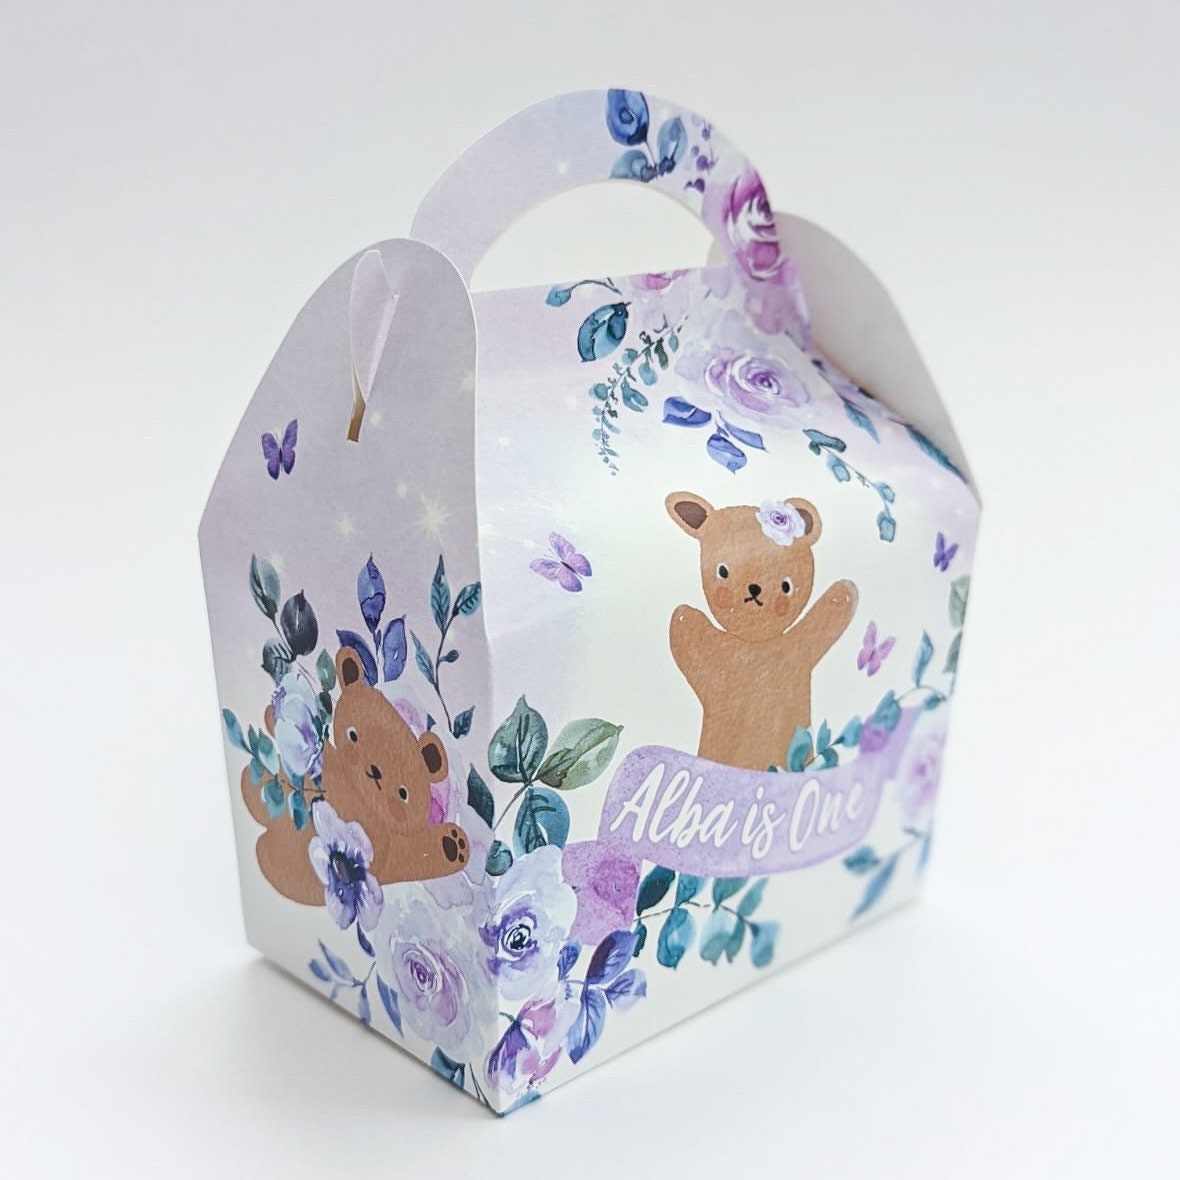 Watercolour Floral Purple Teddy Bears and Balloons Personalised Children’s Party Box Gift Bag Favour